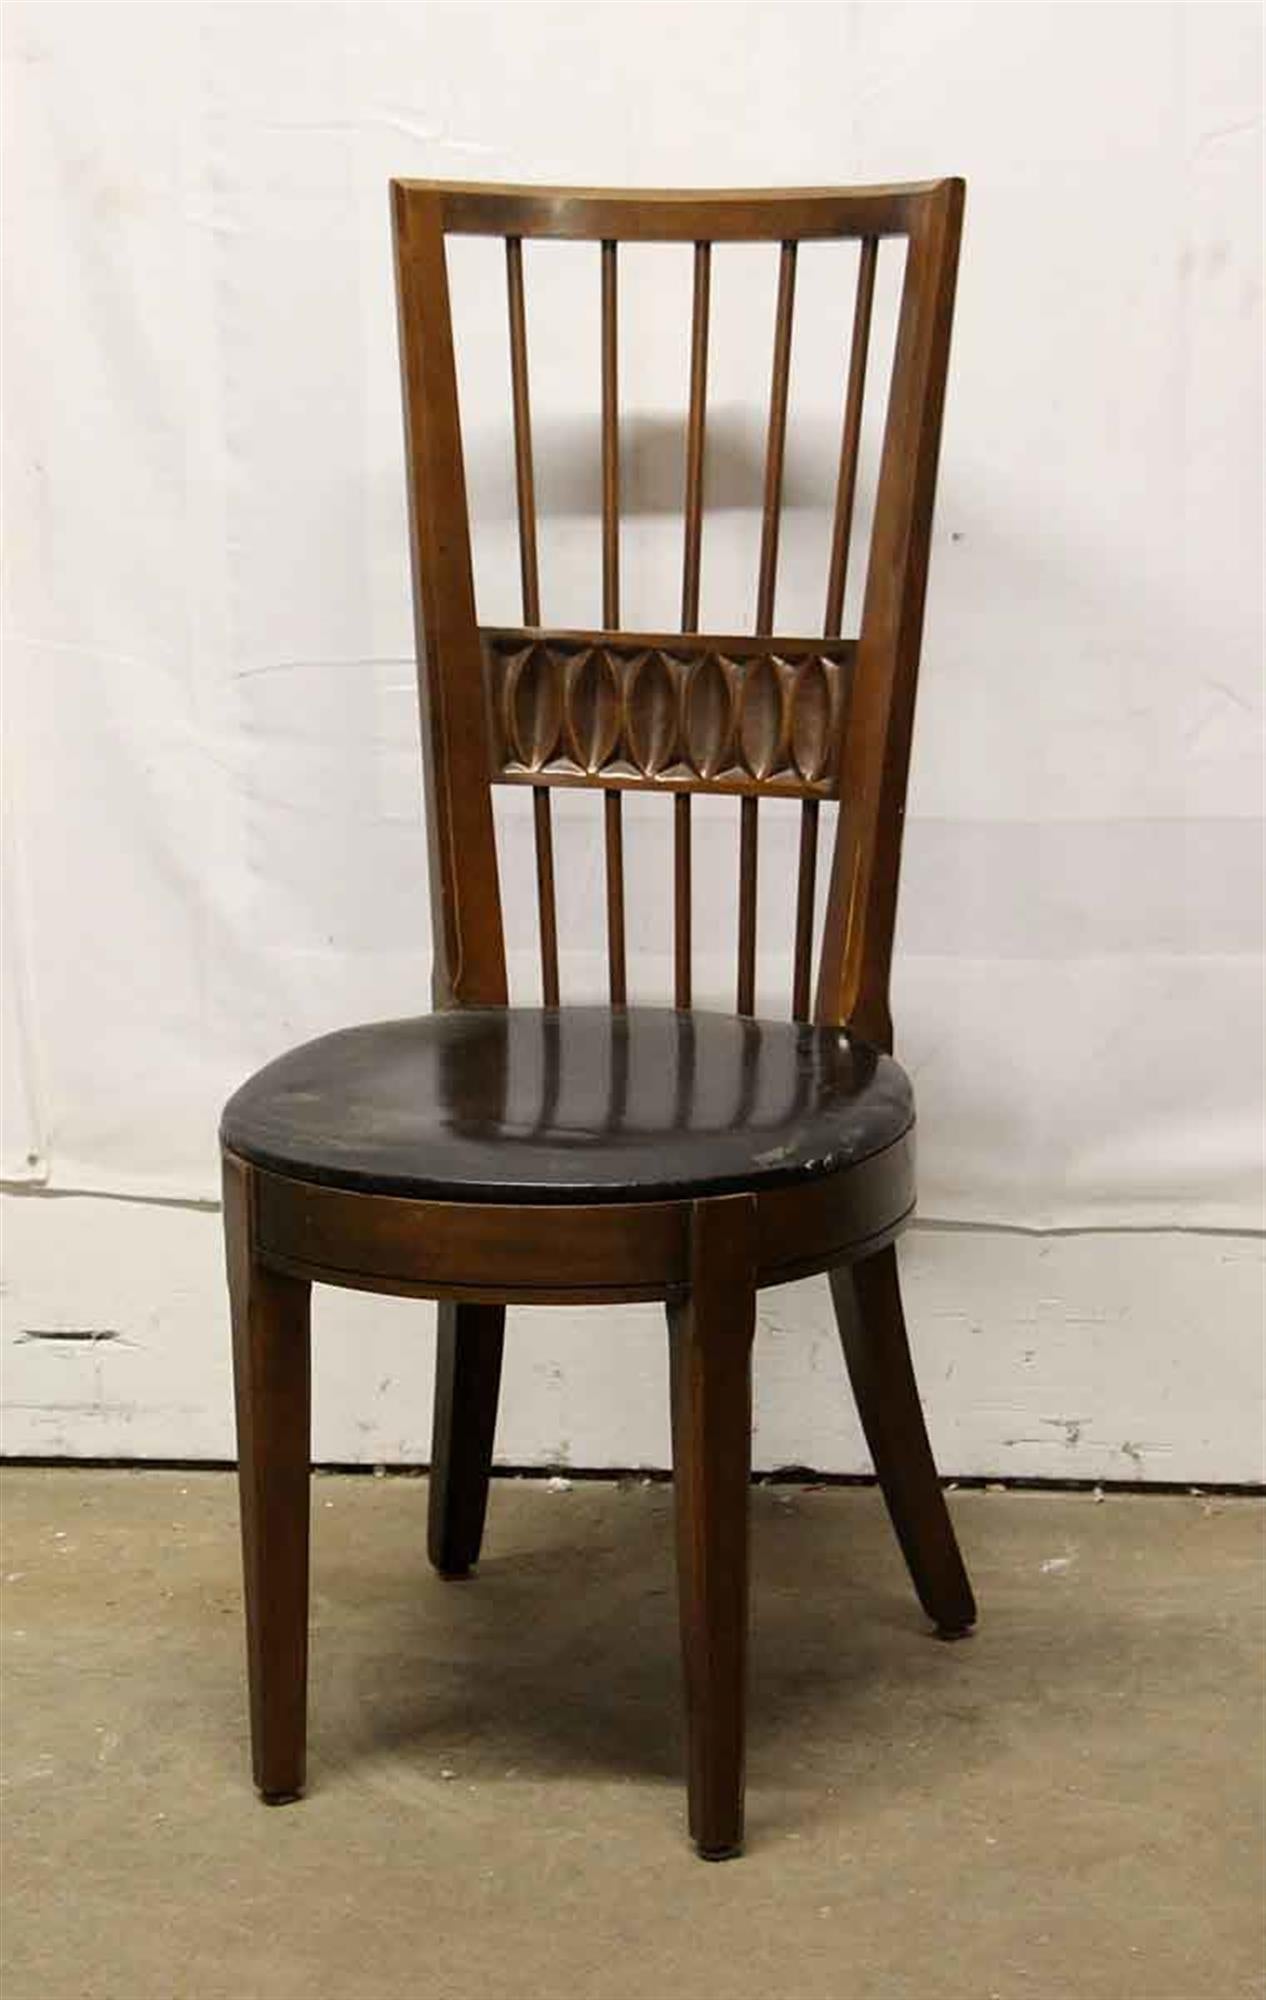 Solid carved wood spindle back Mid-Century Modern dining chairs with a round black vinyl seat from 2001. Made in America by Blowing Rock Furniture of North Carolina. Priced as a set. Please note, this item is located in our Los Angeles, CA location.